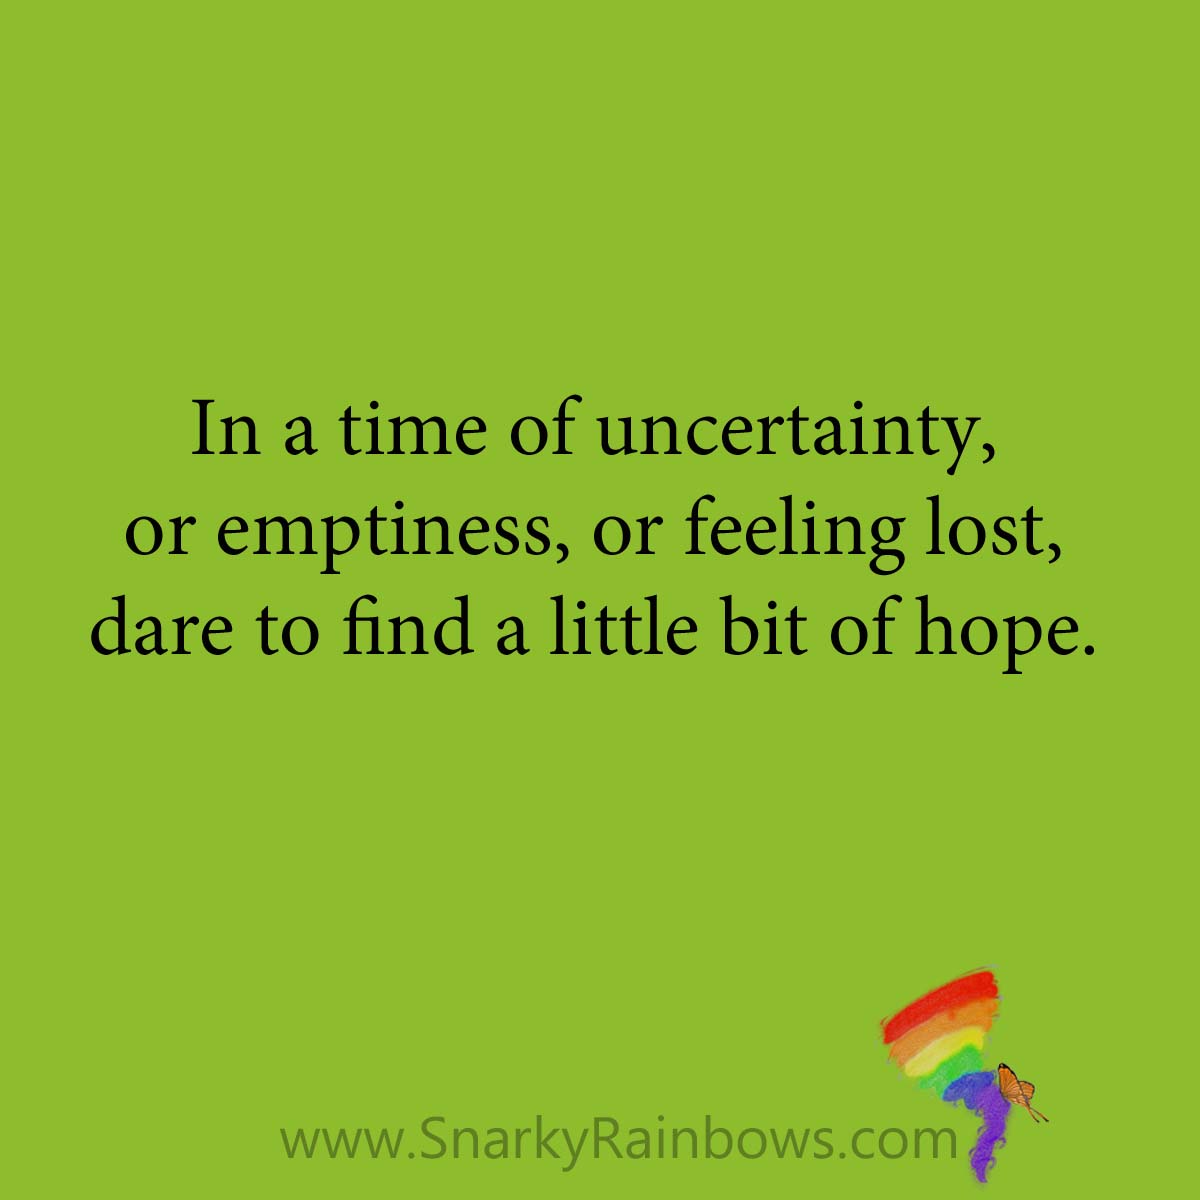 quote - little bits of hope